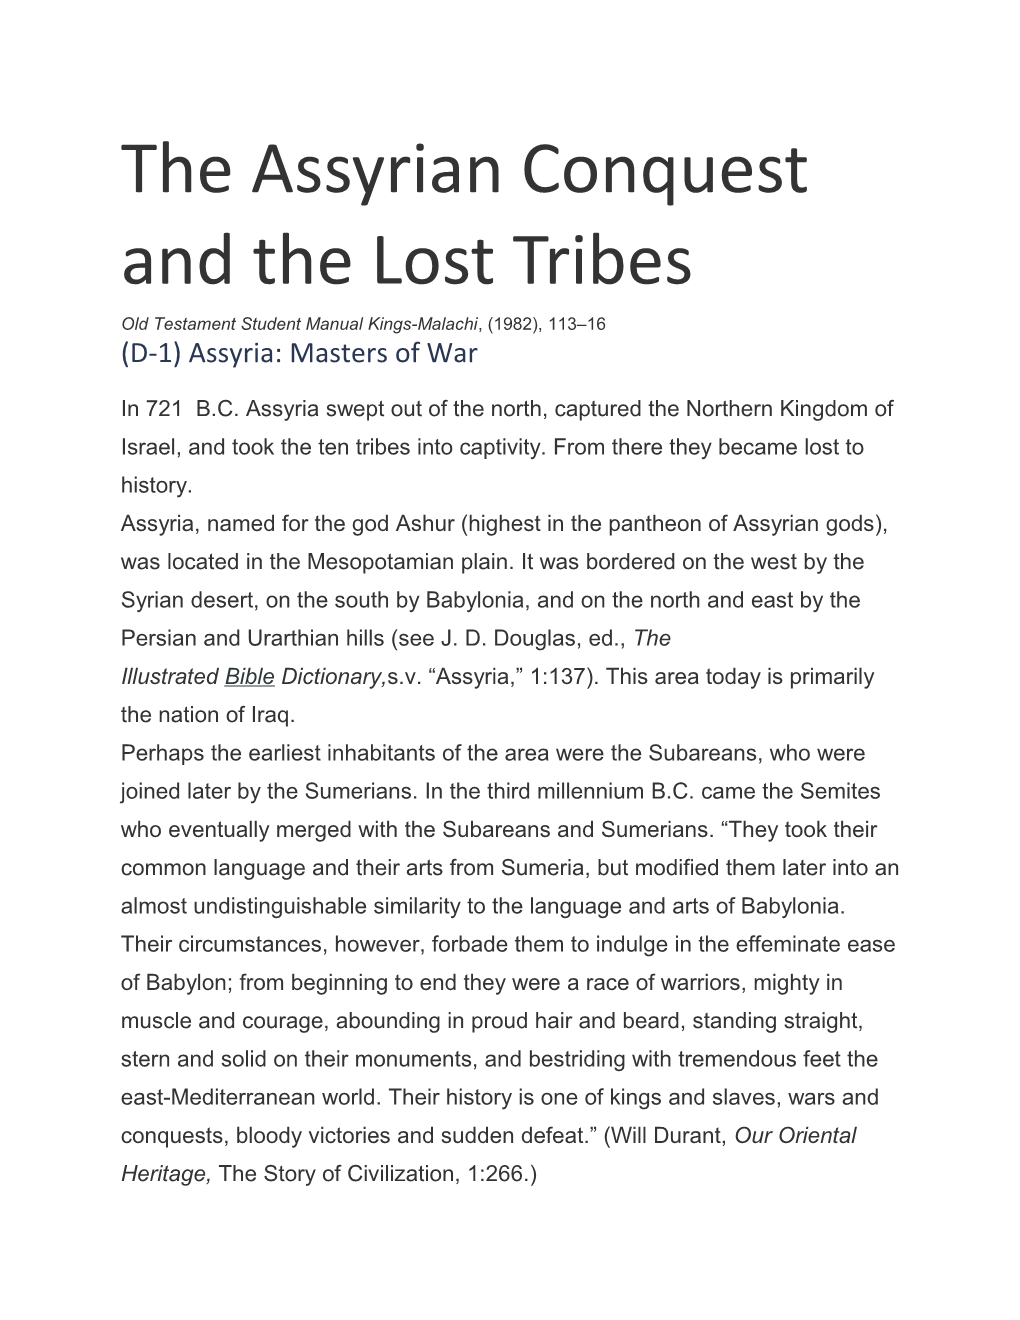 The Assyrian Conquest and the Lost Tribes